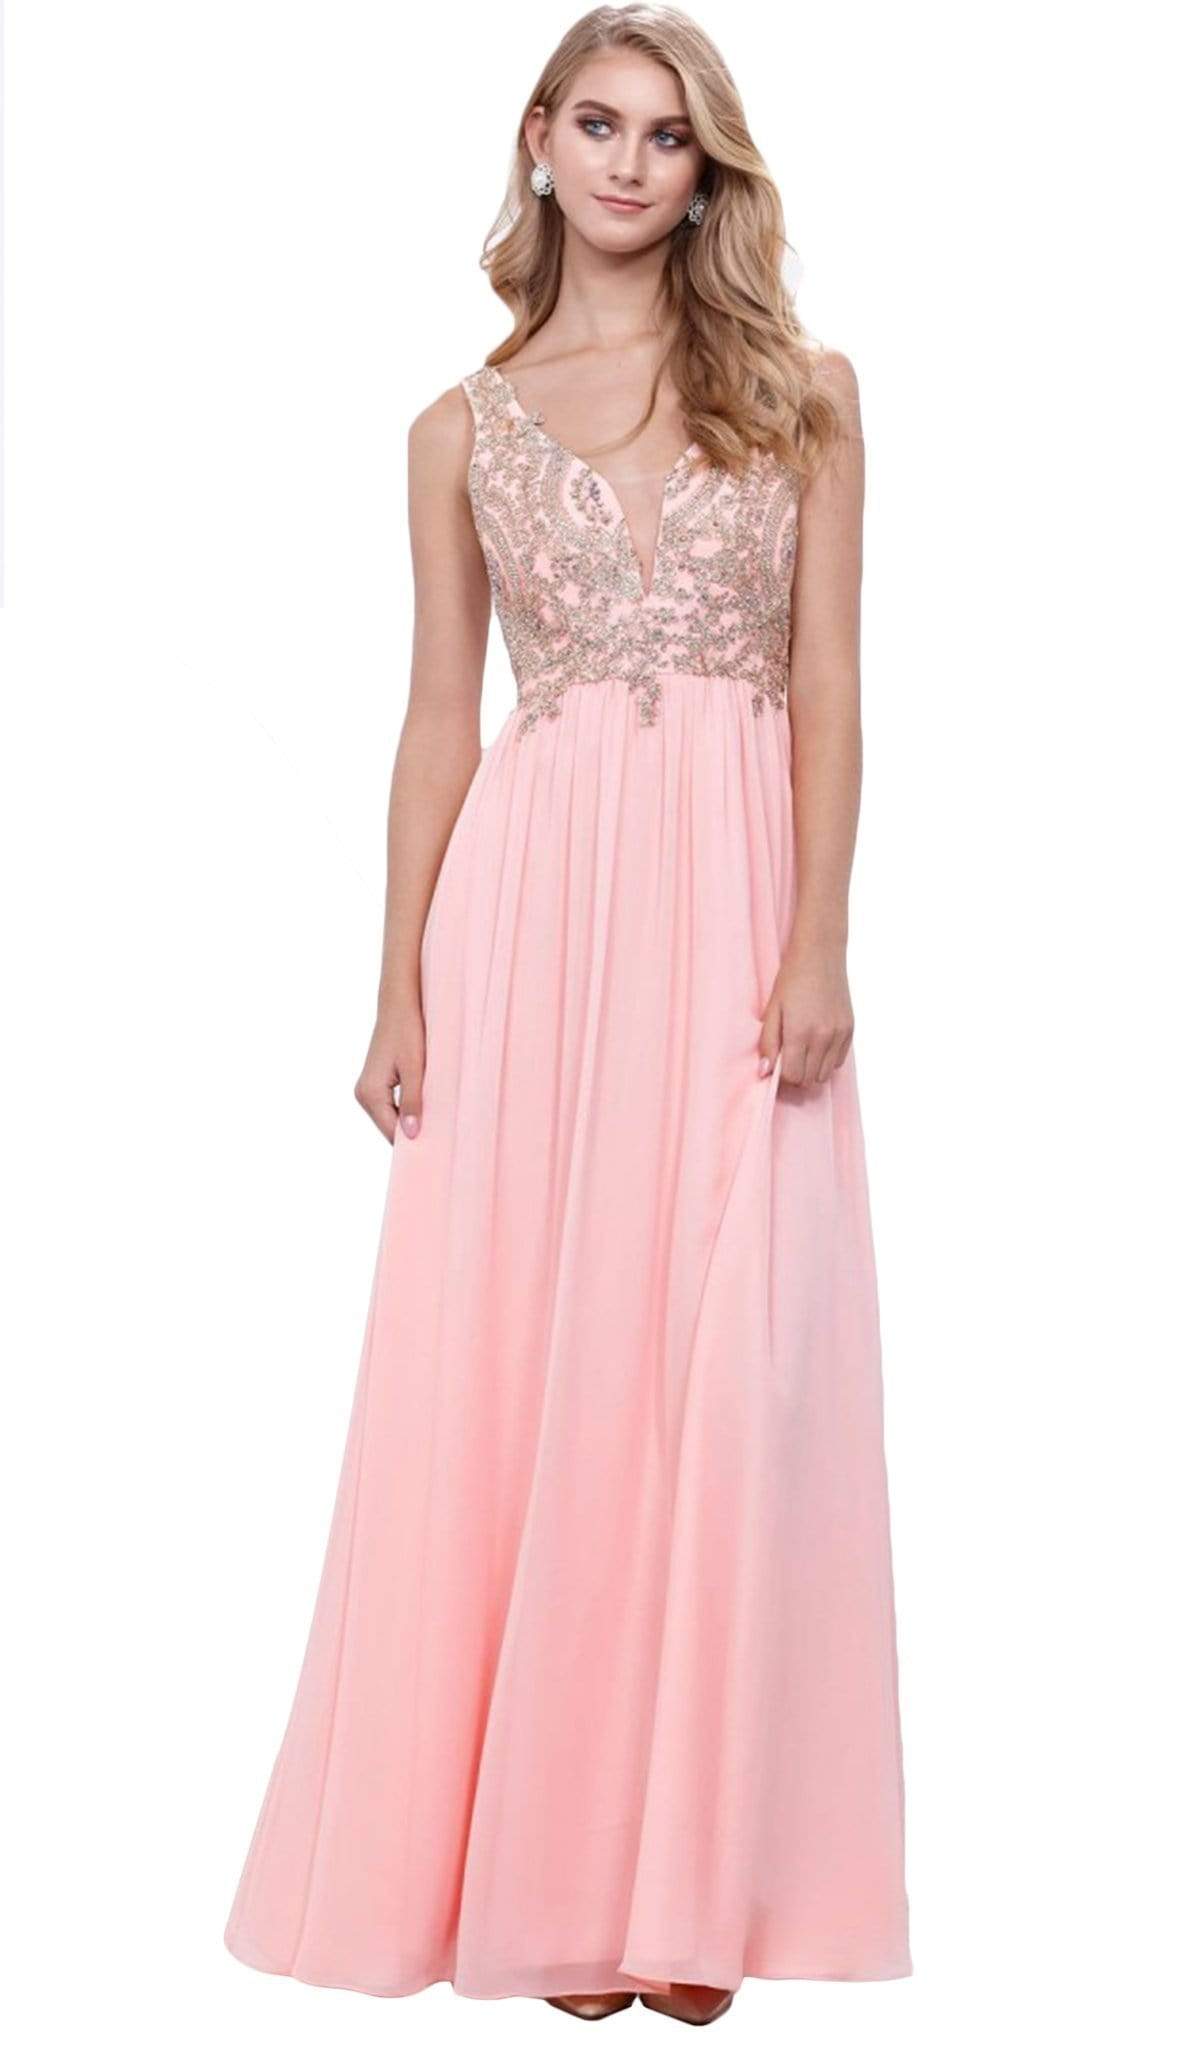 Nox Anabel - 8343 Sleeveless Beaded V Neck Lace Bodice Long Gown Special Occasion Dress XS / Bashful Pink